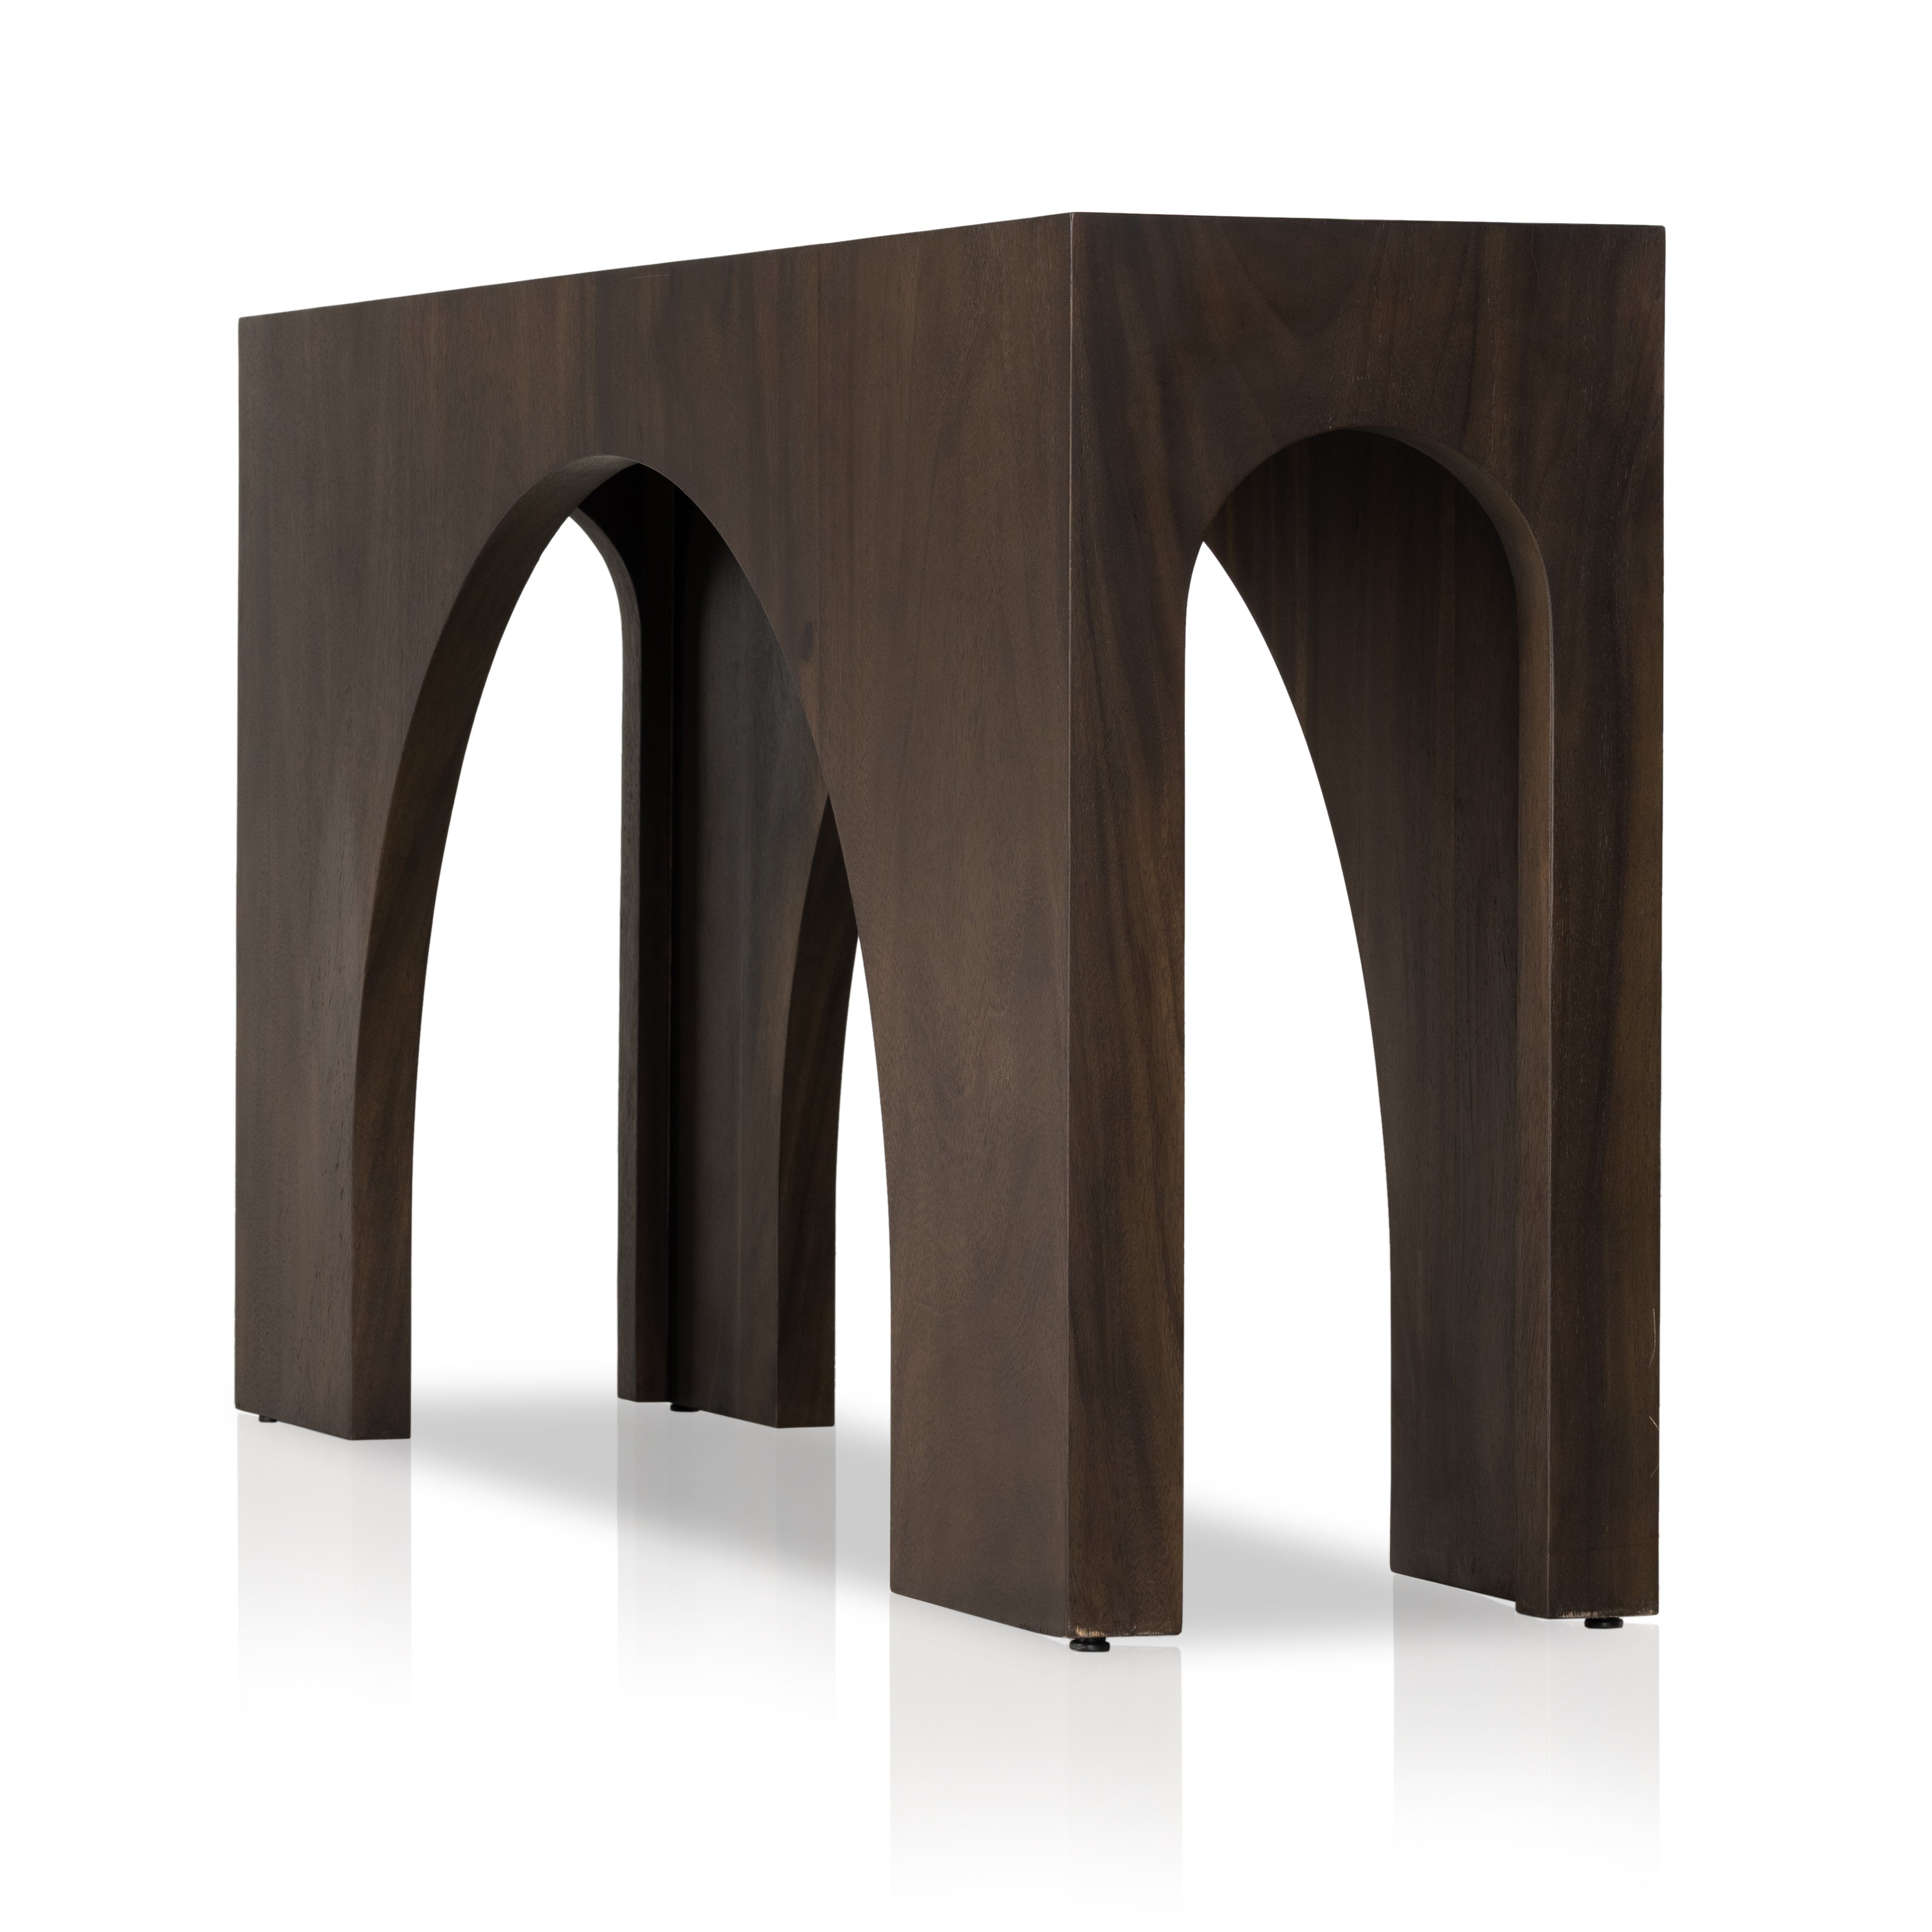 Clean and simple, with great impact. Made from smoked Guanacaste, shapely arches and block corners speak to the architectural inspiration behind this eye-catching console table. Amethyst Home provides interior design, new construction, custom furniture, and area rugs in the Calabasas metro area.